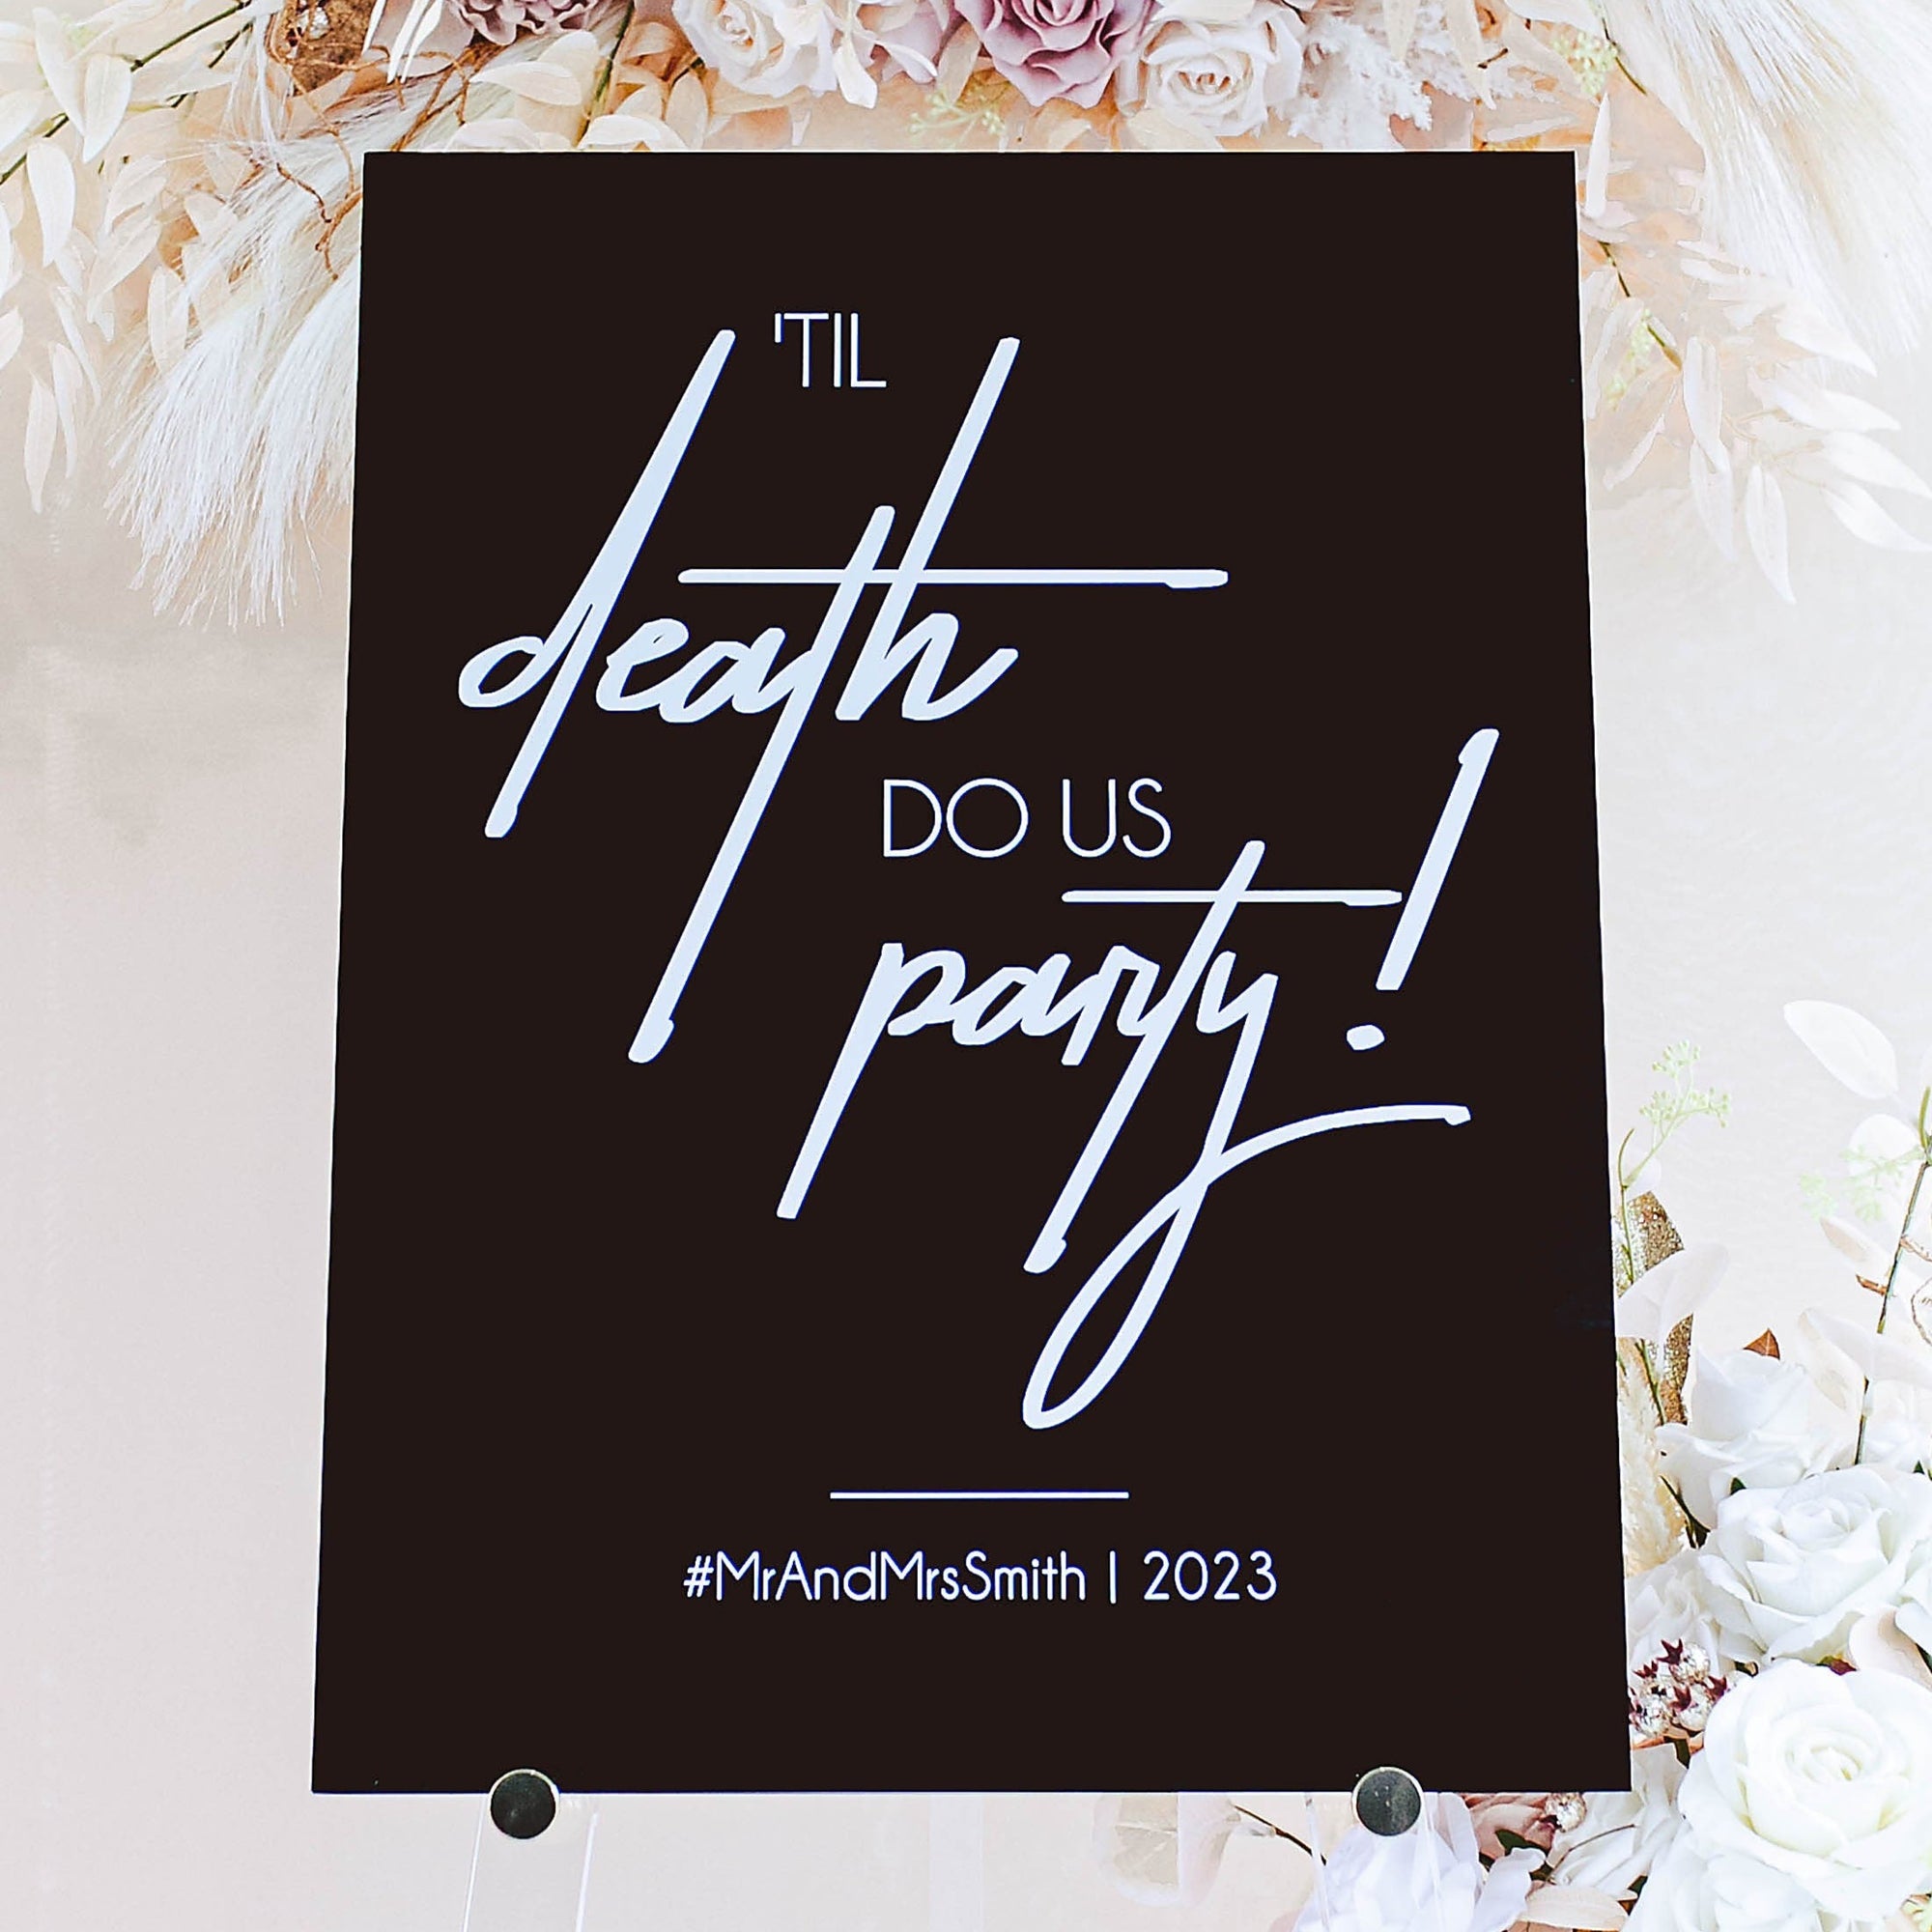 Til Death Do Us Party Moody Minimalist Black Acrylic Wedding Welcome Sign, Edgy October Winter Modern Signs With Names And Date